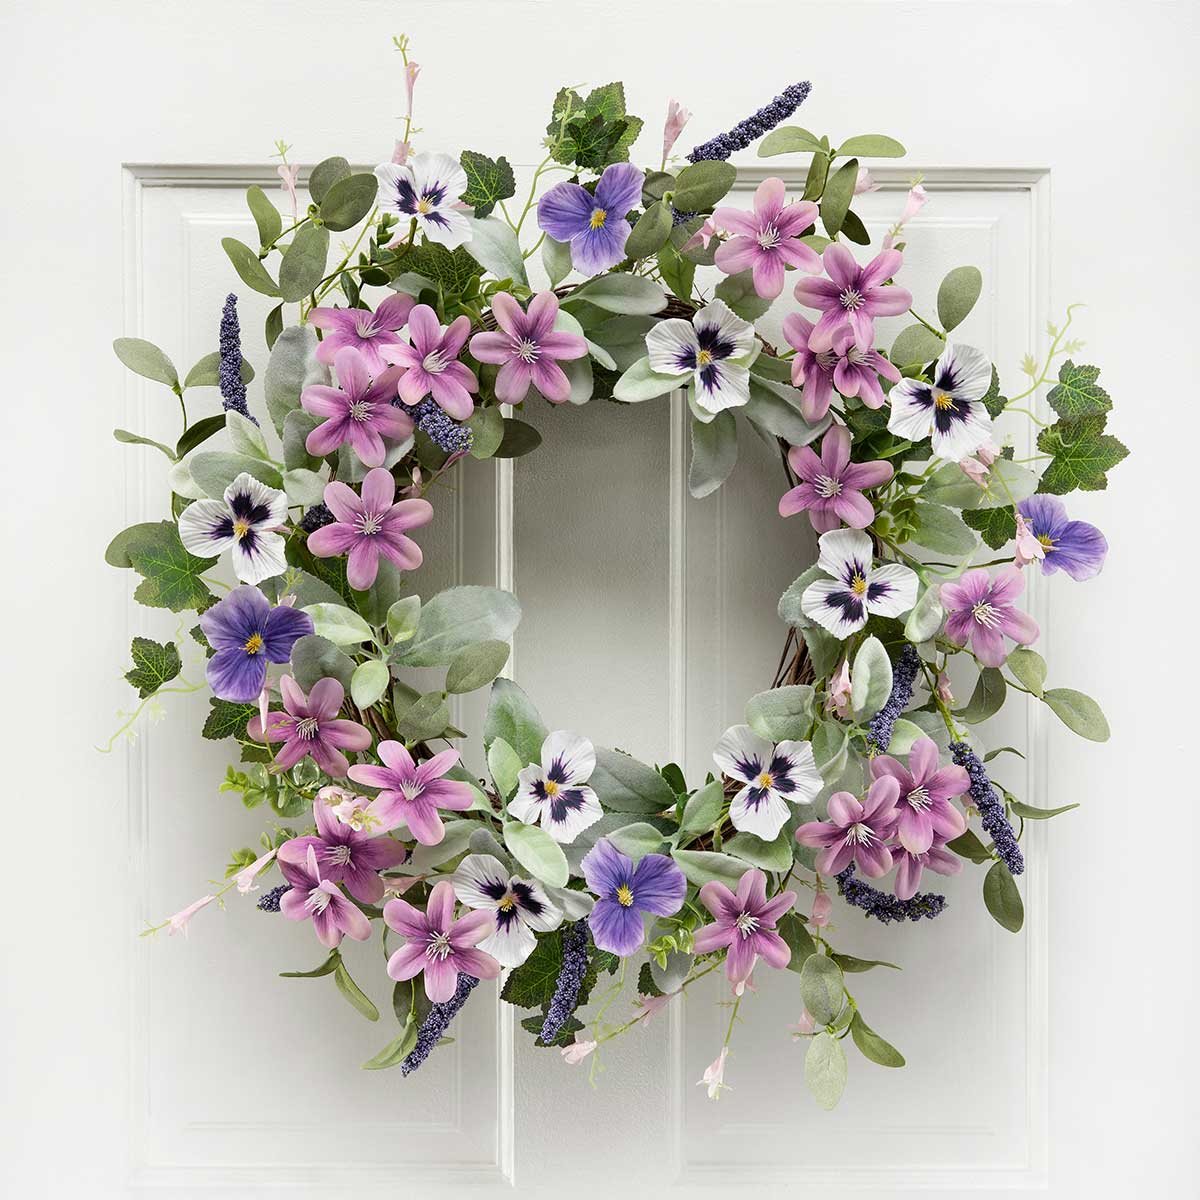 WREATH PANSY BLOSSOM 22IN (INNER RING 10IN) PURPLE POLYESTER